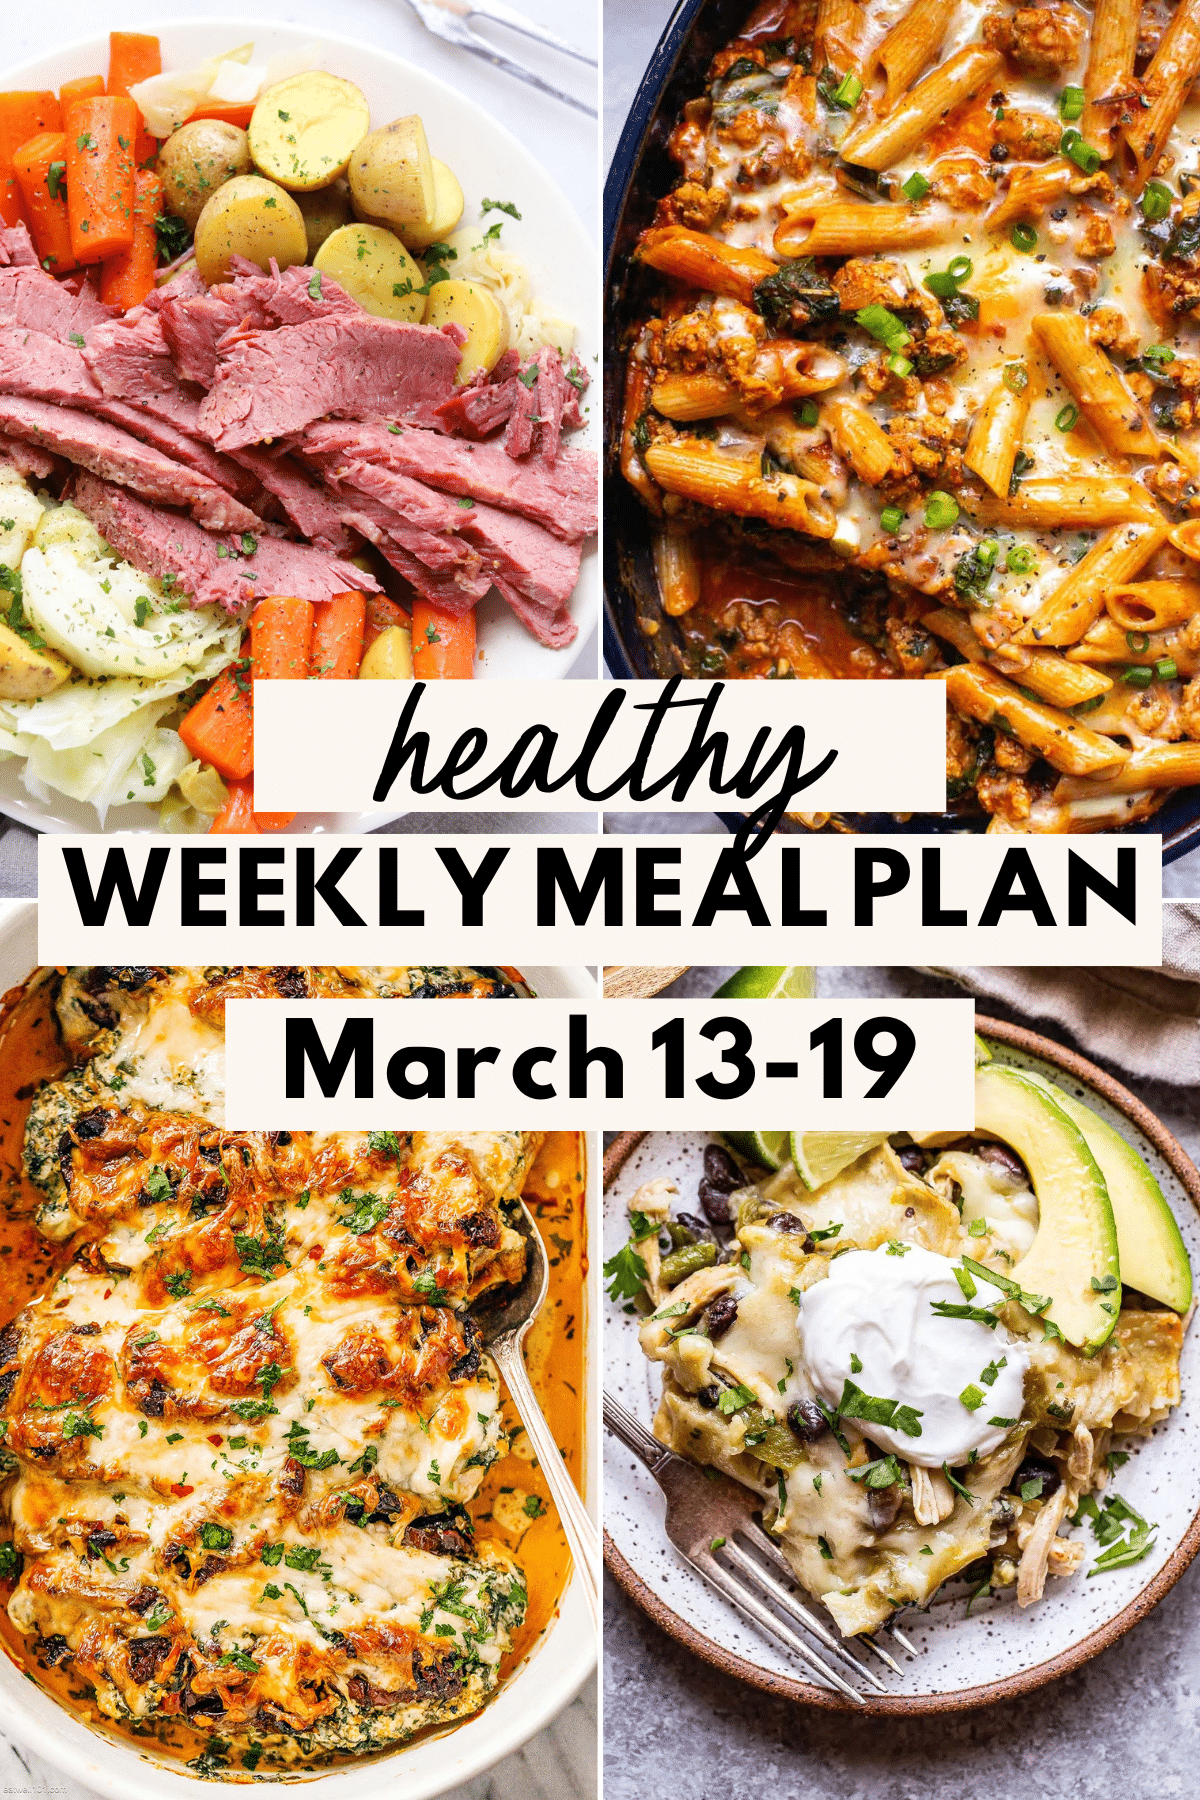 Healthy Weekly Meal Plan collage image with text for Pinterest